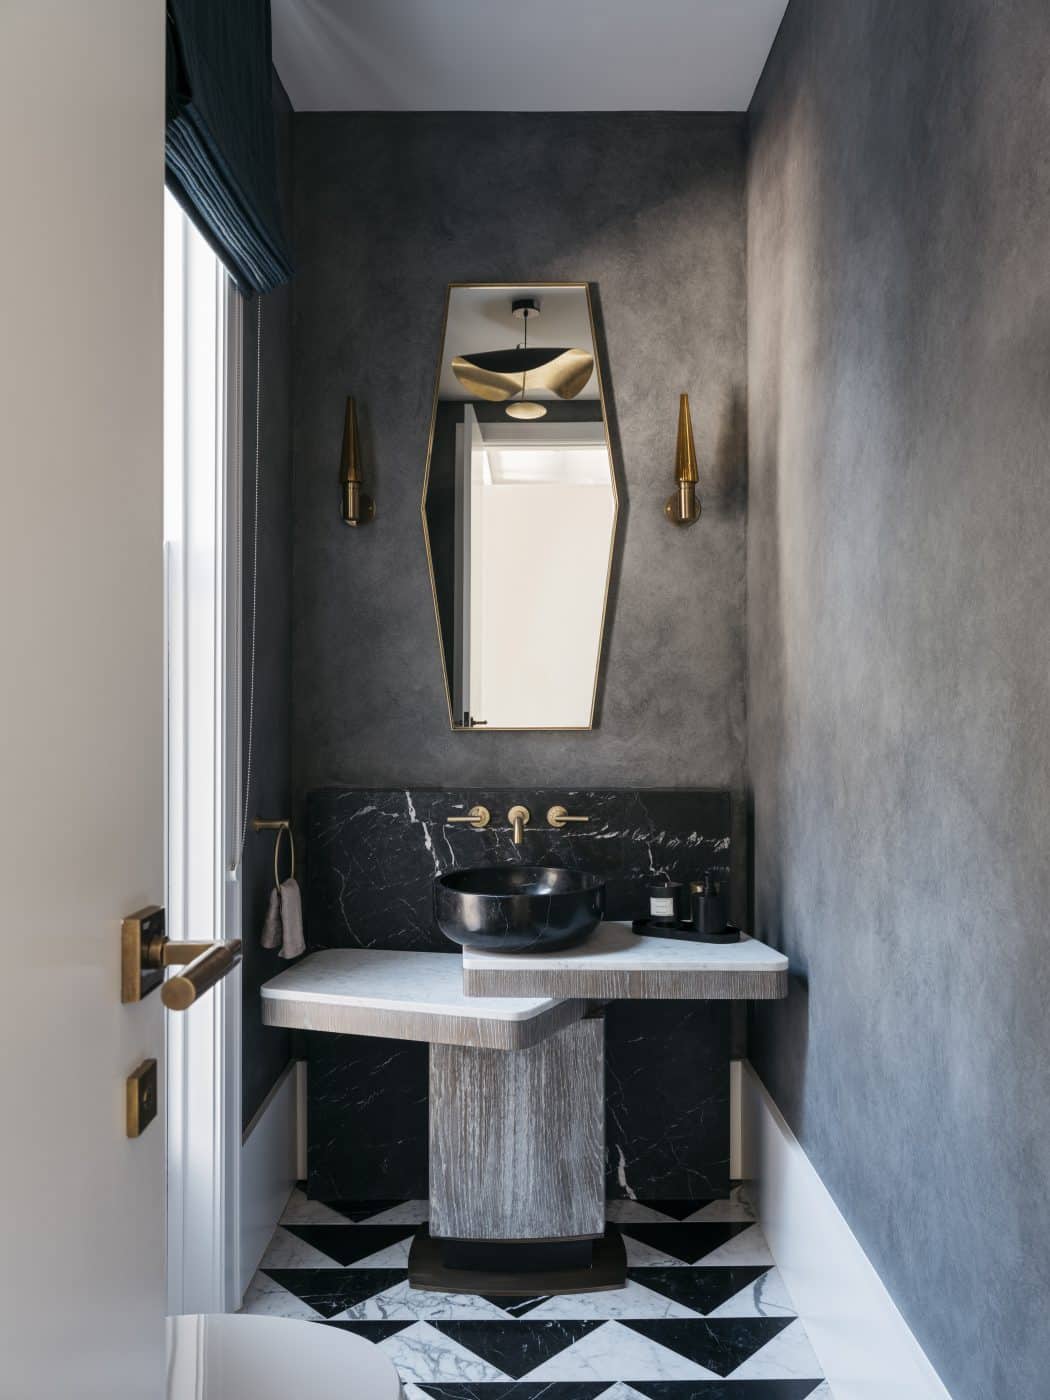 Powder room designed by Dylan Farrell